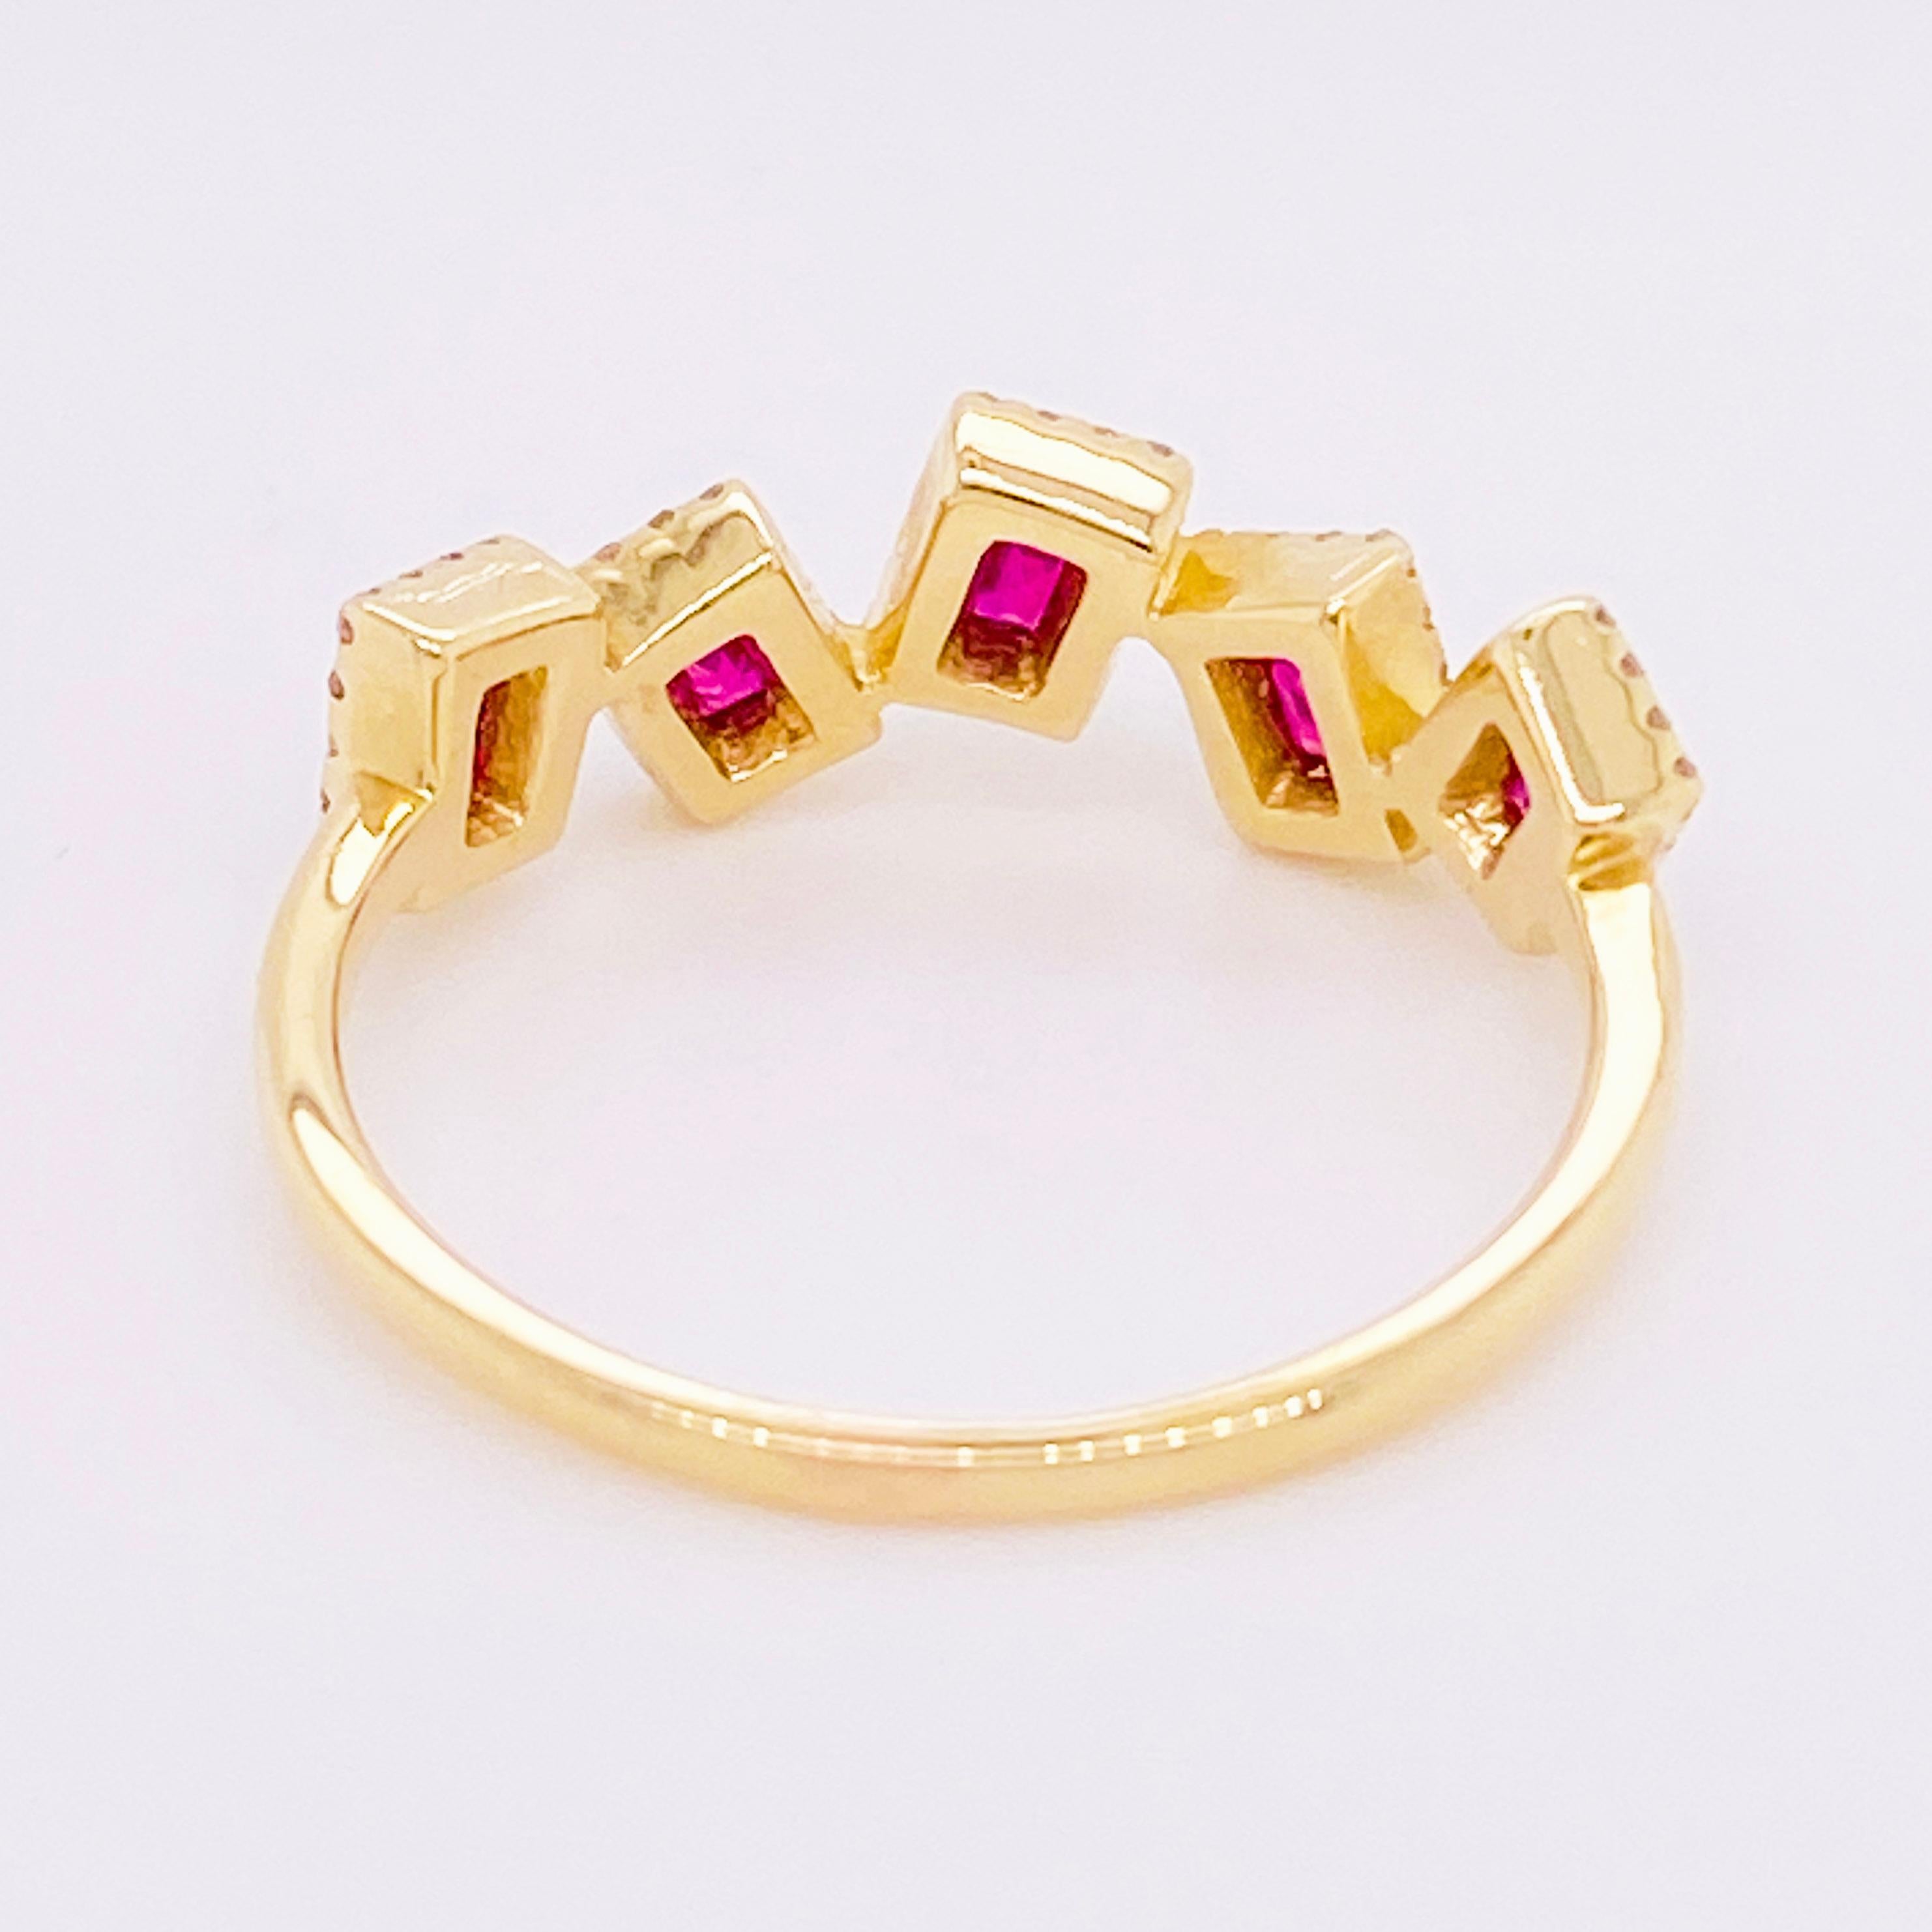 Dancing Ruby Rectangles Ring, Ruby and Diamond, 14K Yellow Gold, Artistic In New Condition For Sale In Austin, TX